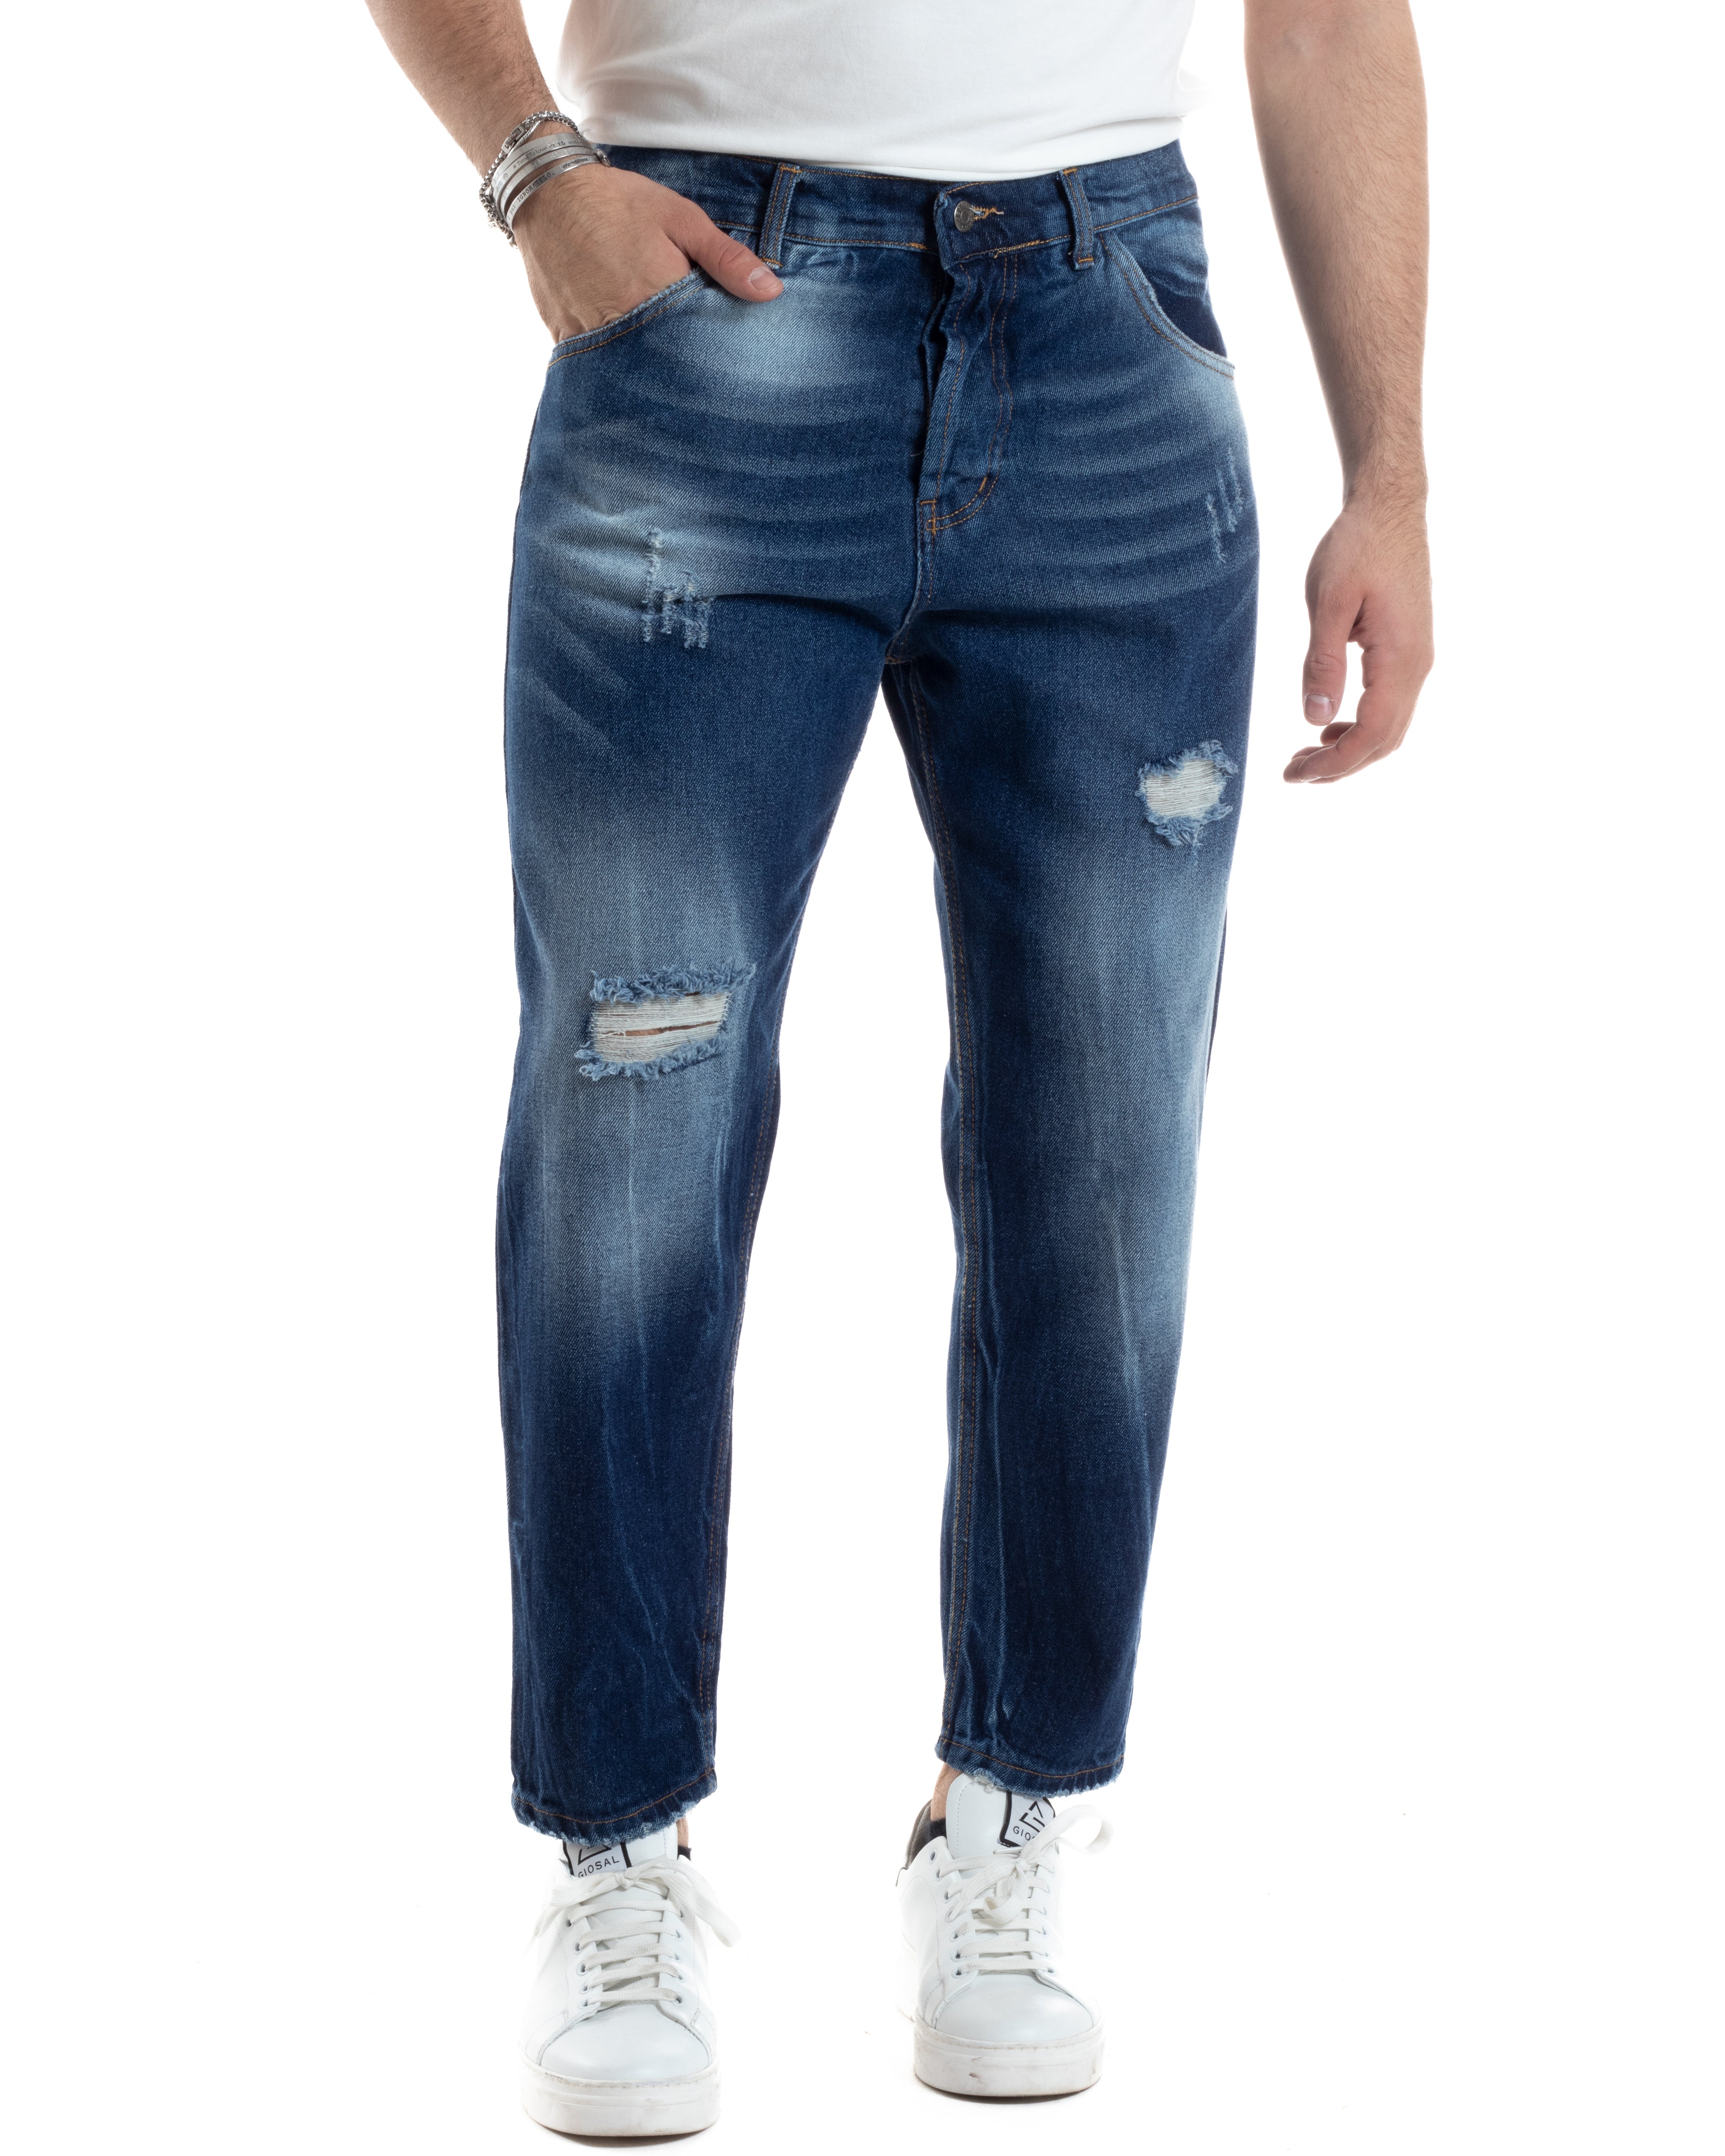 Pantaloni Jeans Uomo Loose Fit Denim Con Rotture Stonewashed Casual GIOSAL-JS1036A